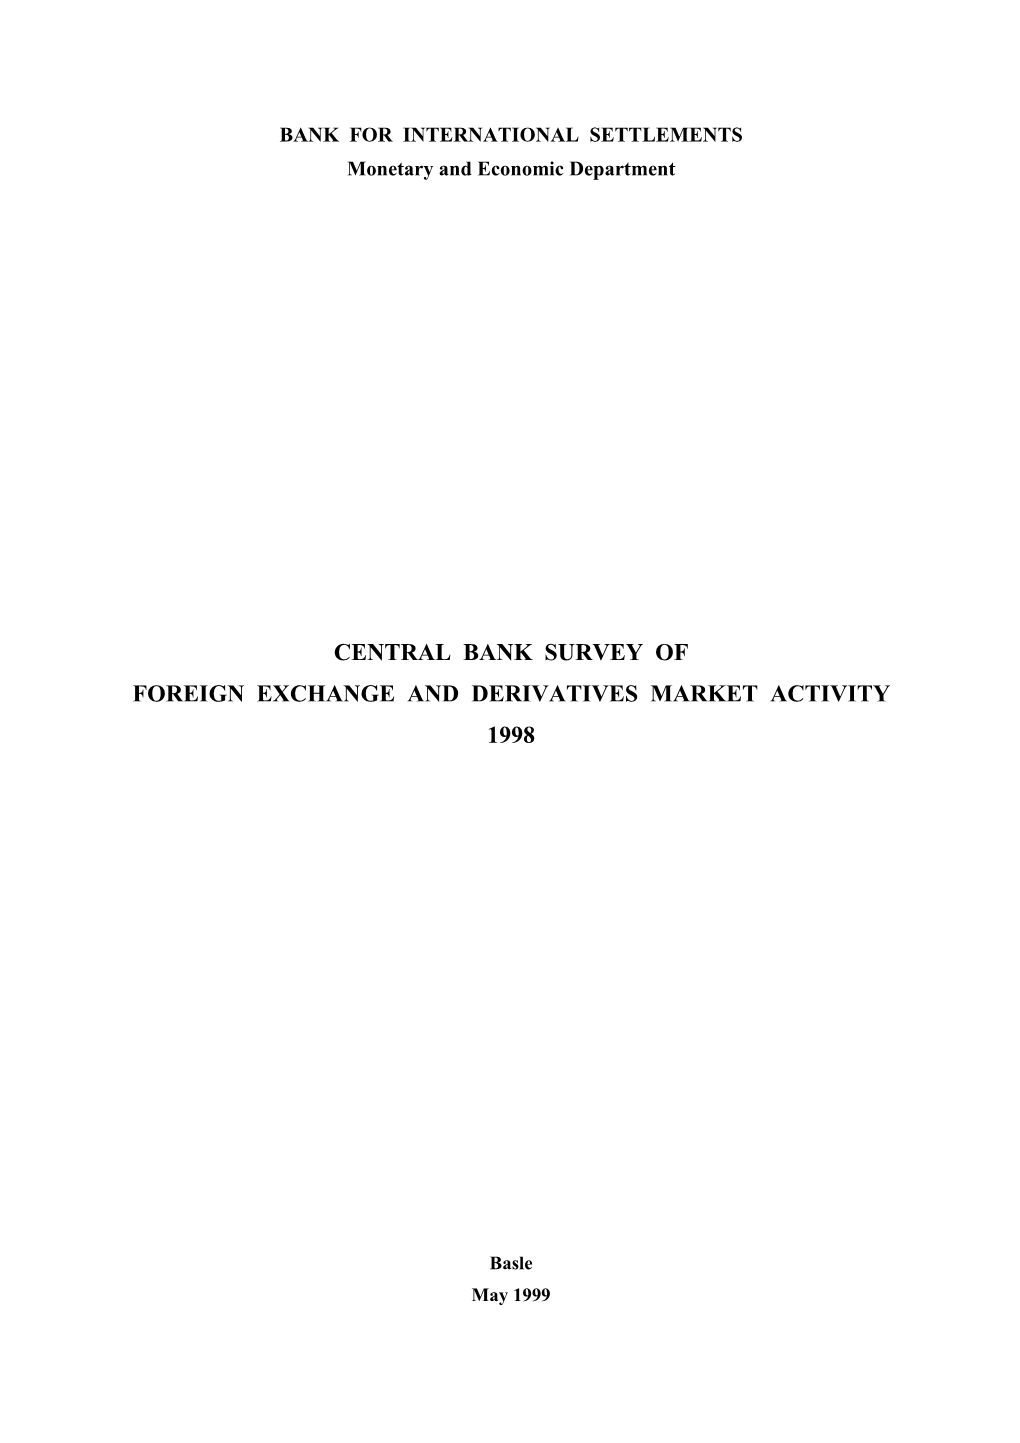 Central Bank Survey of Foreign Exchange and Derivatives Market Activity 1998